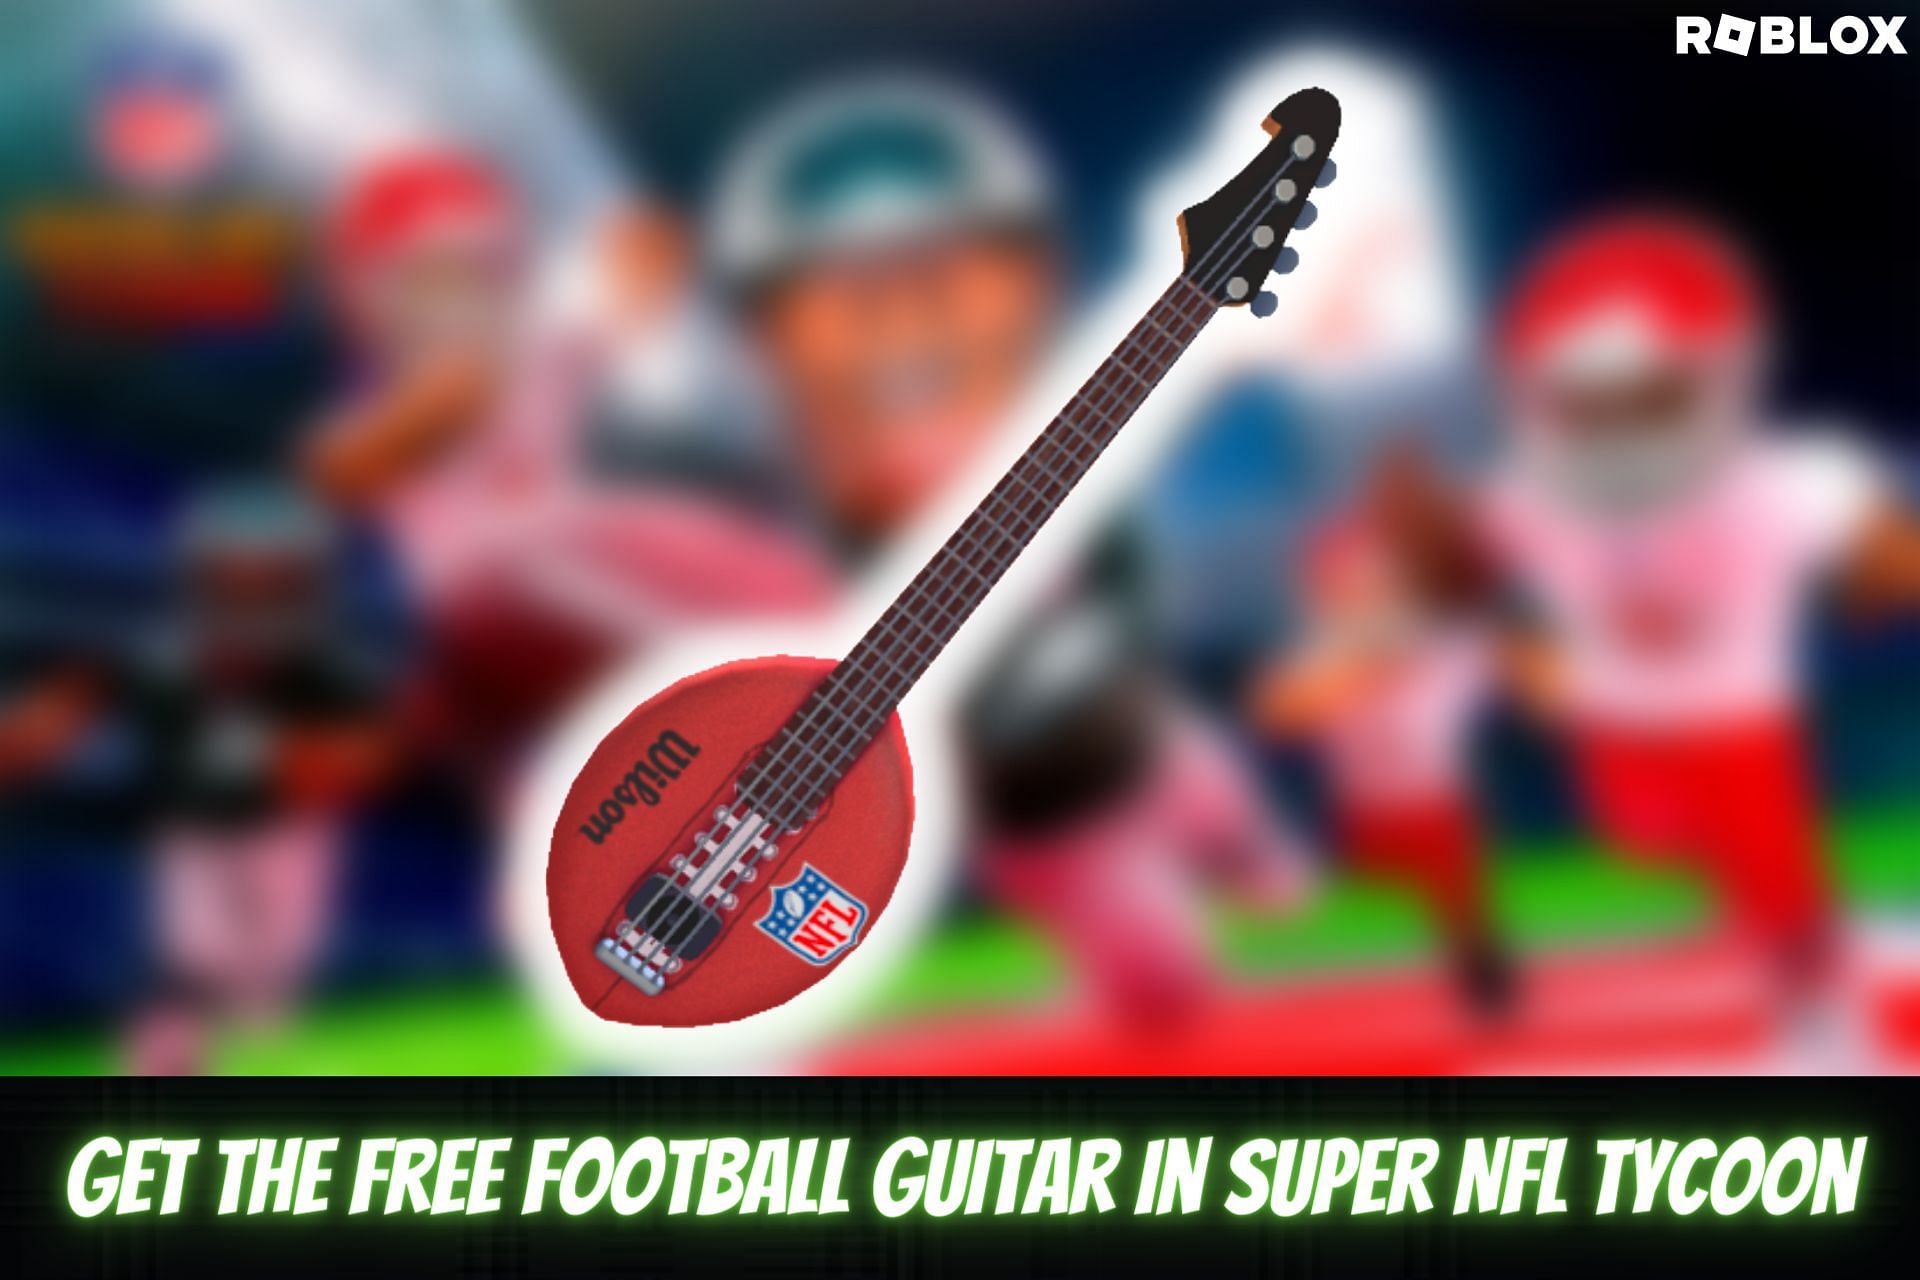 get the free Football Guitar in Super NFL Tycoon